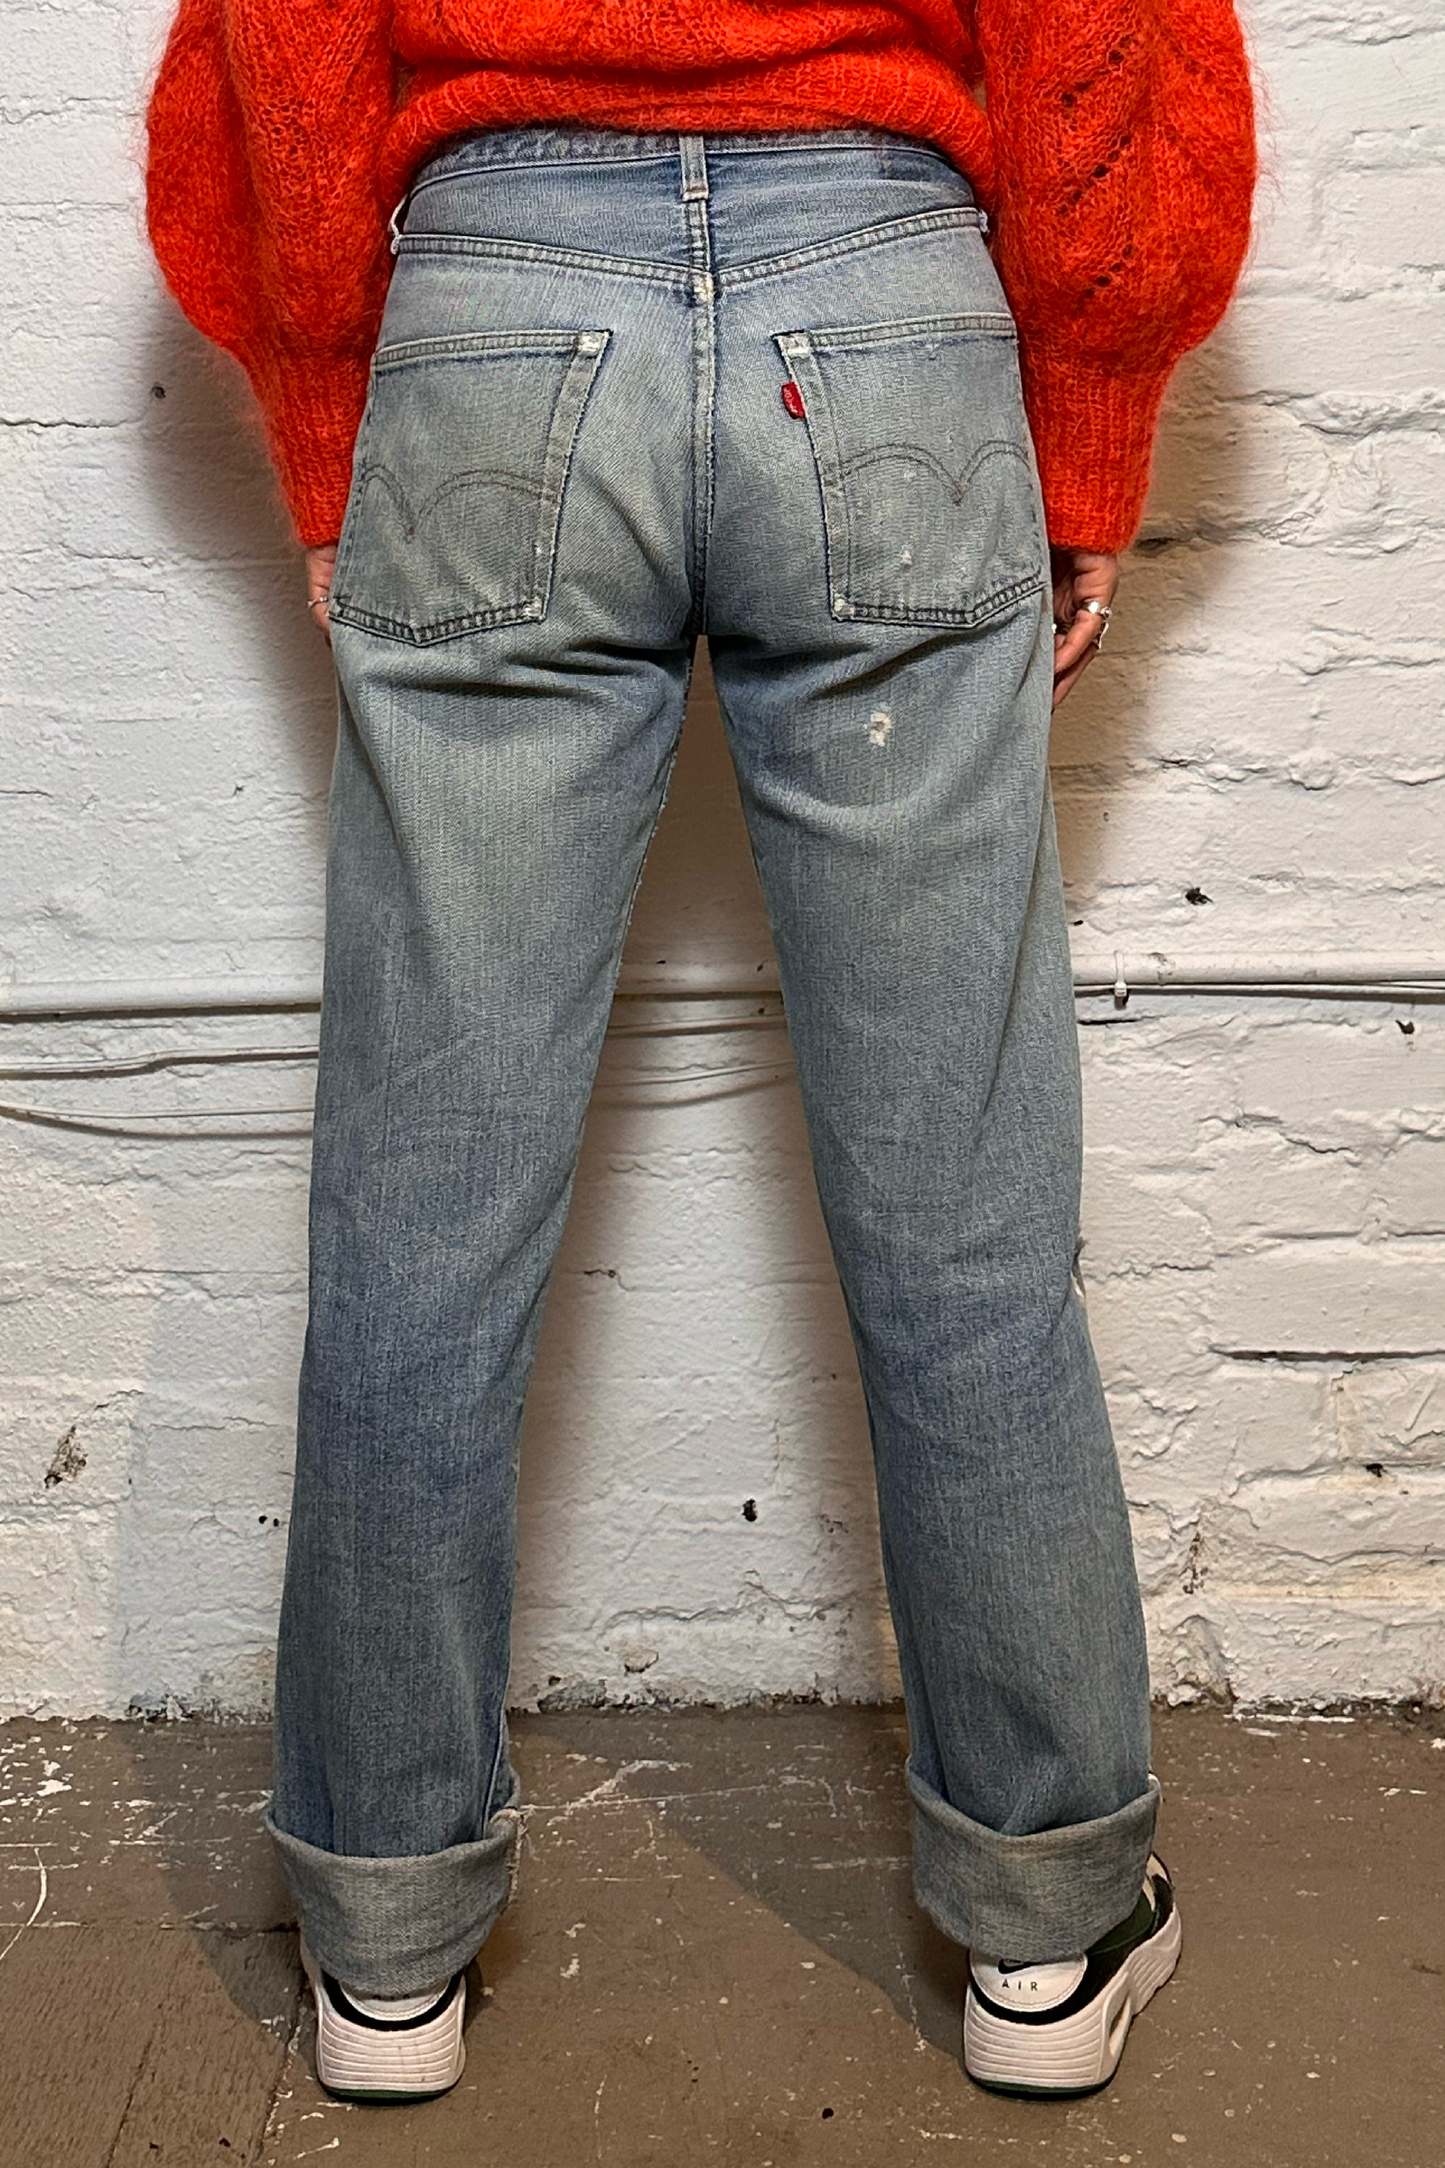 Vintage 1970s/80s "Levi's" Red Lines Jeans